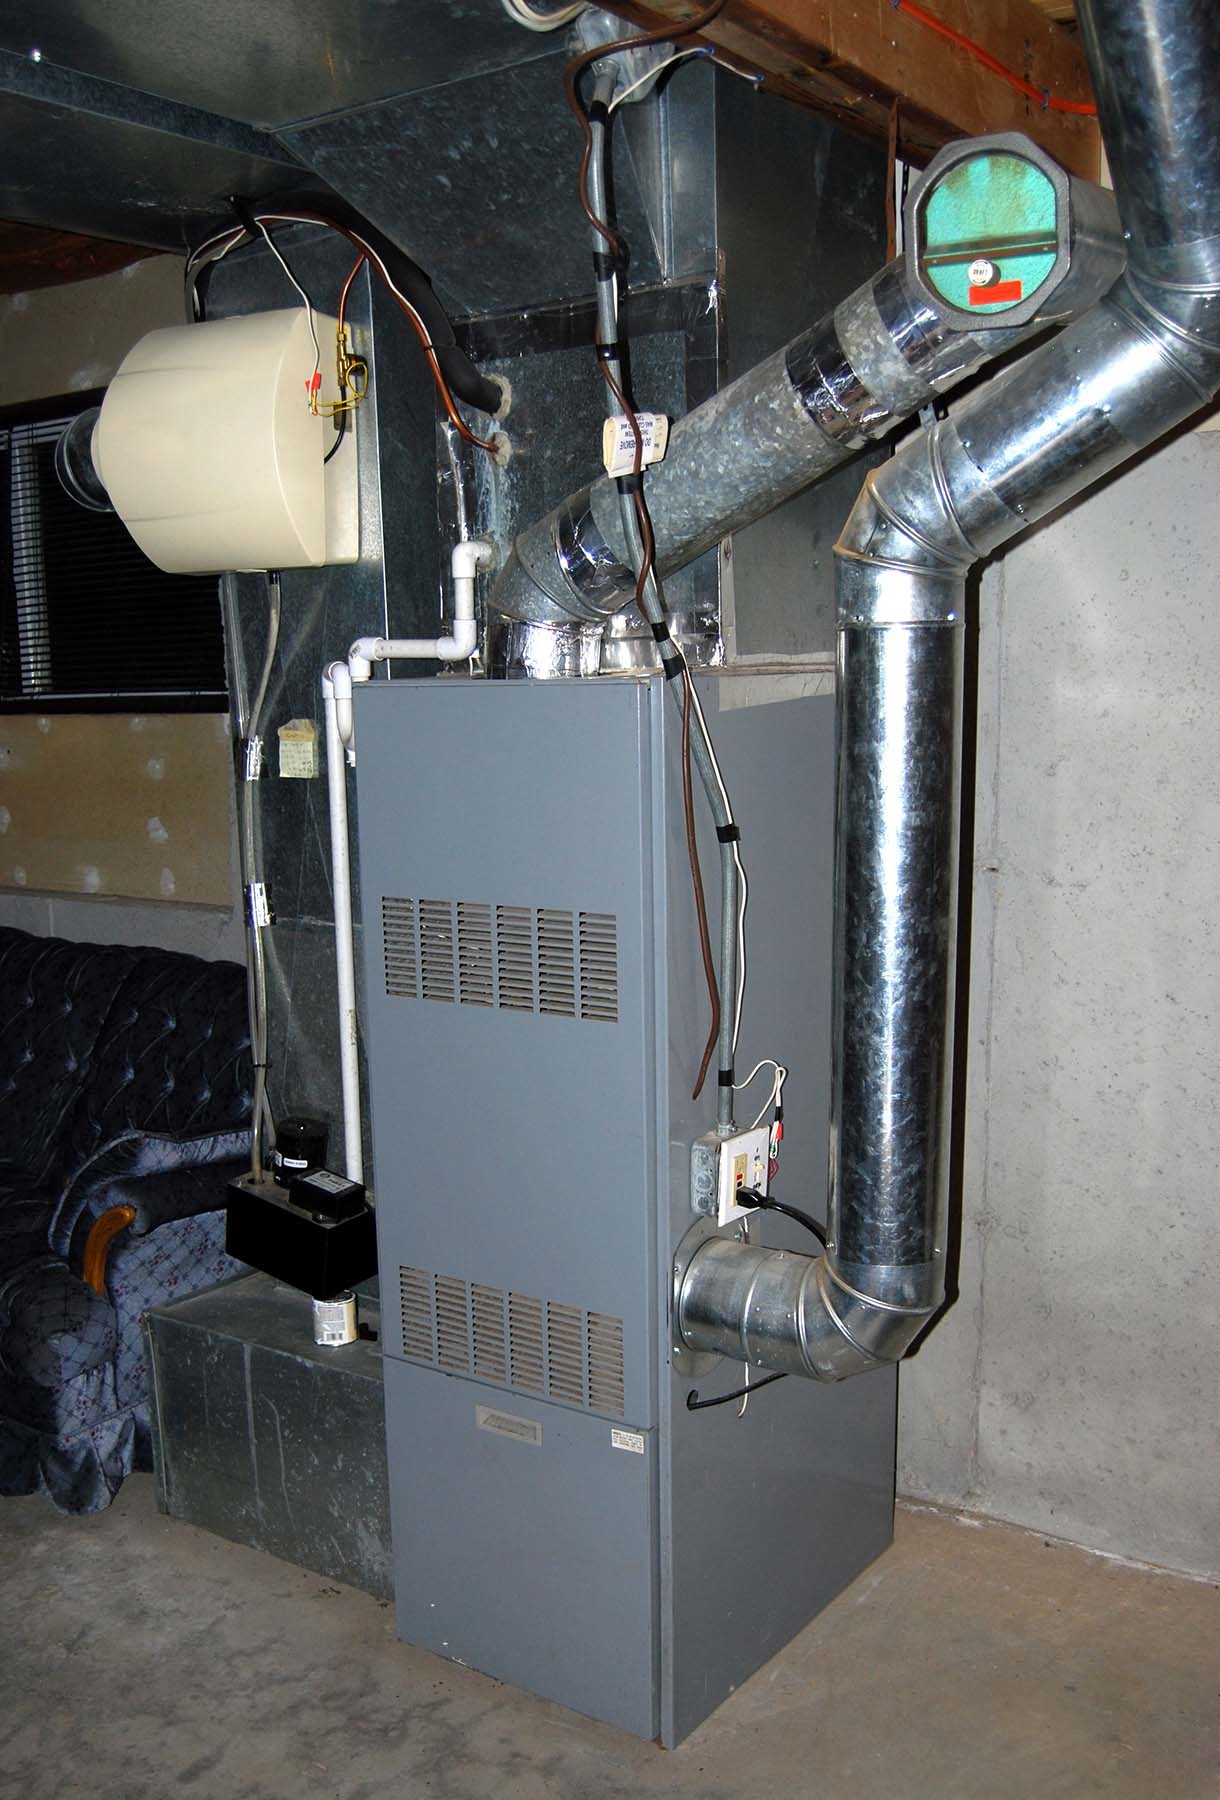 Merz Heating And Air Conditioning Effingham Il